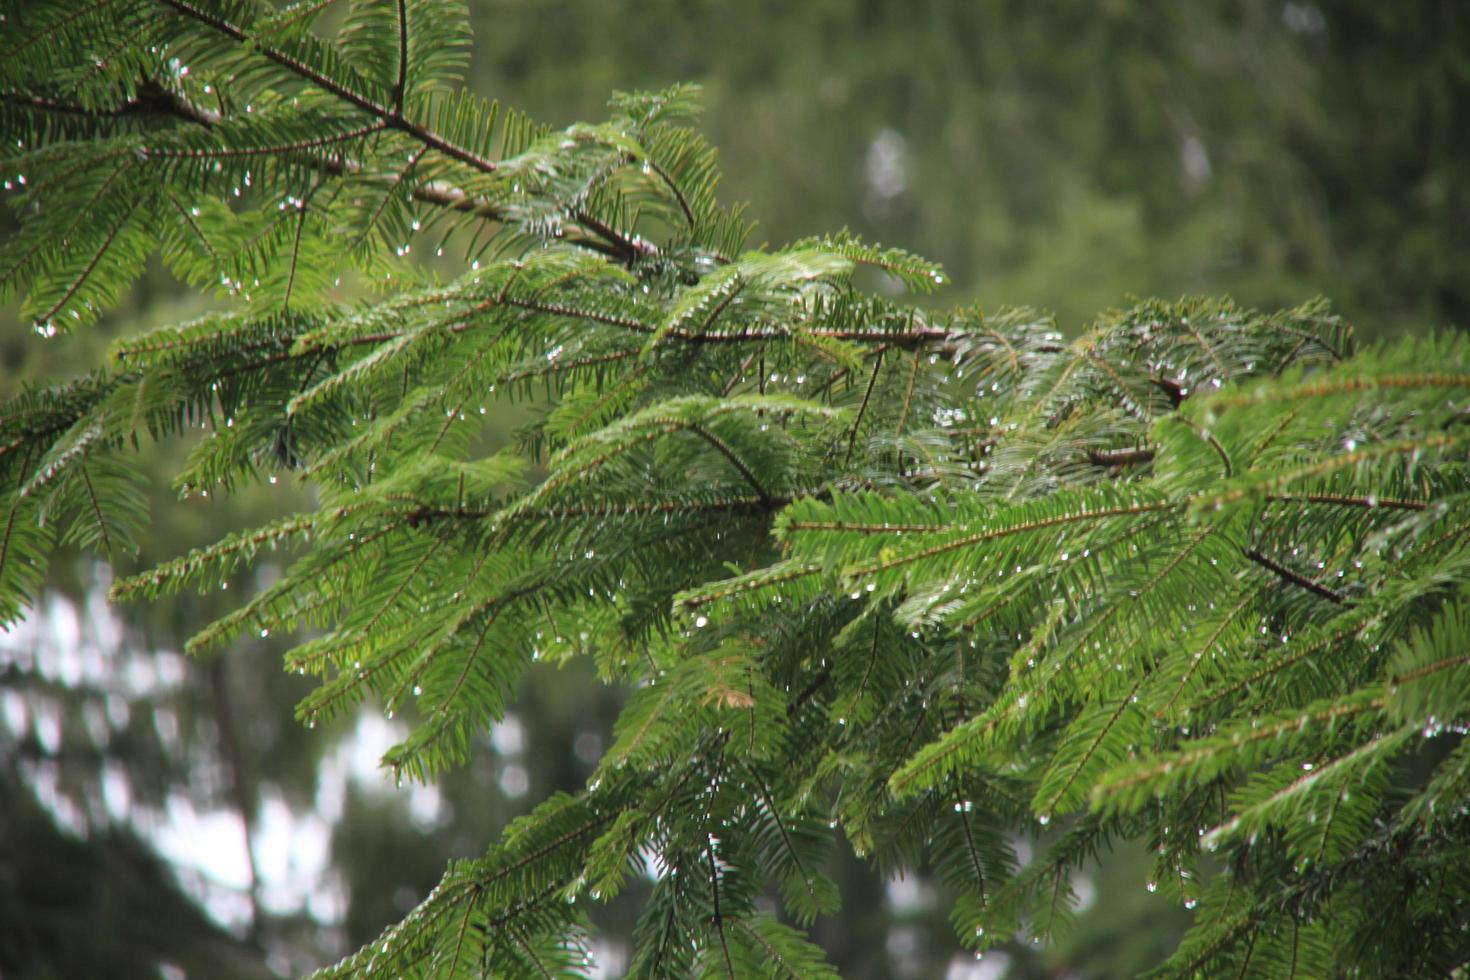 Rainy day in the pine forest photo